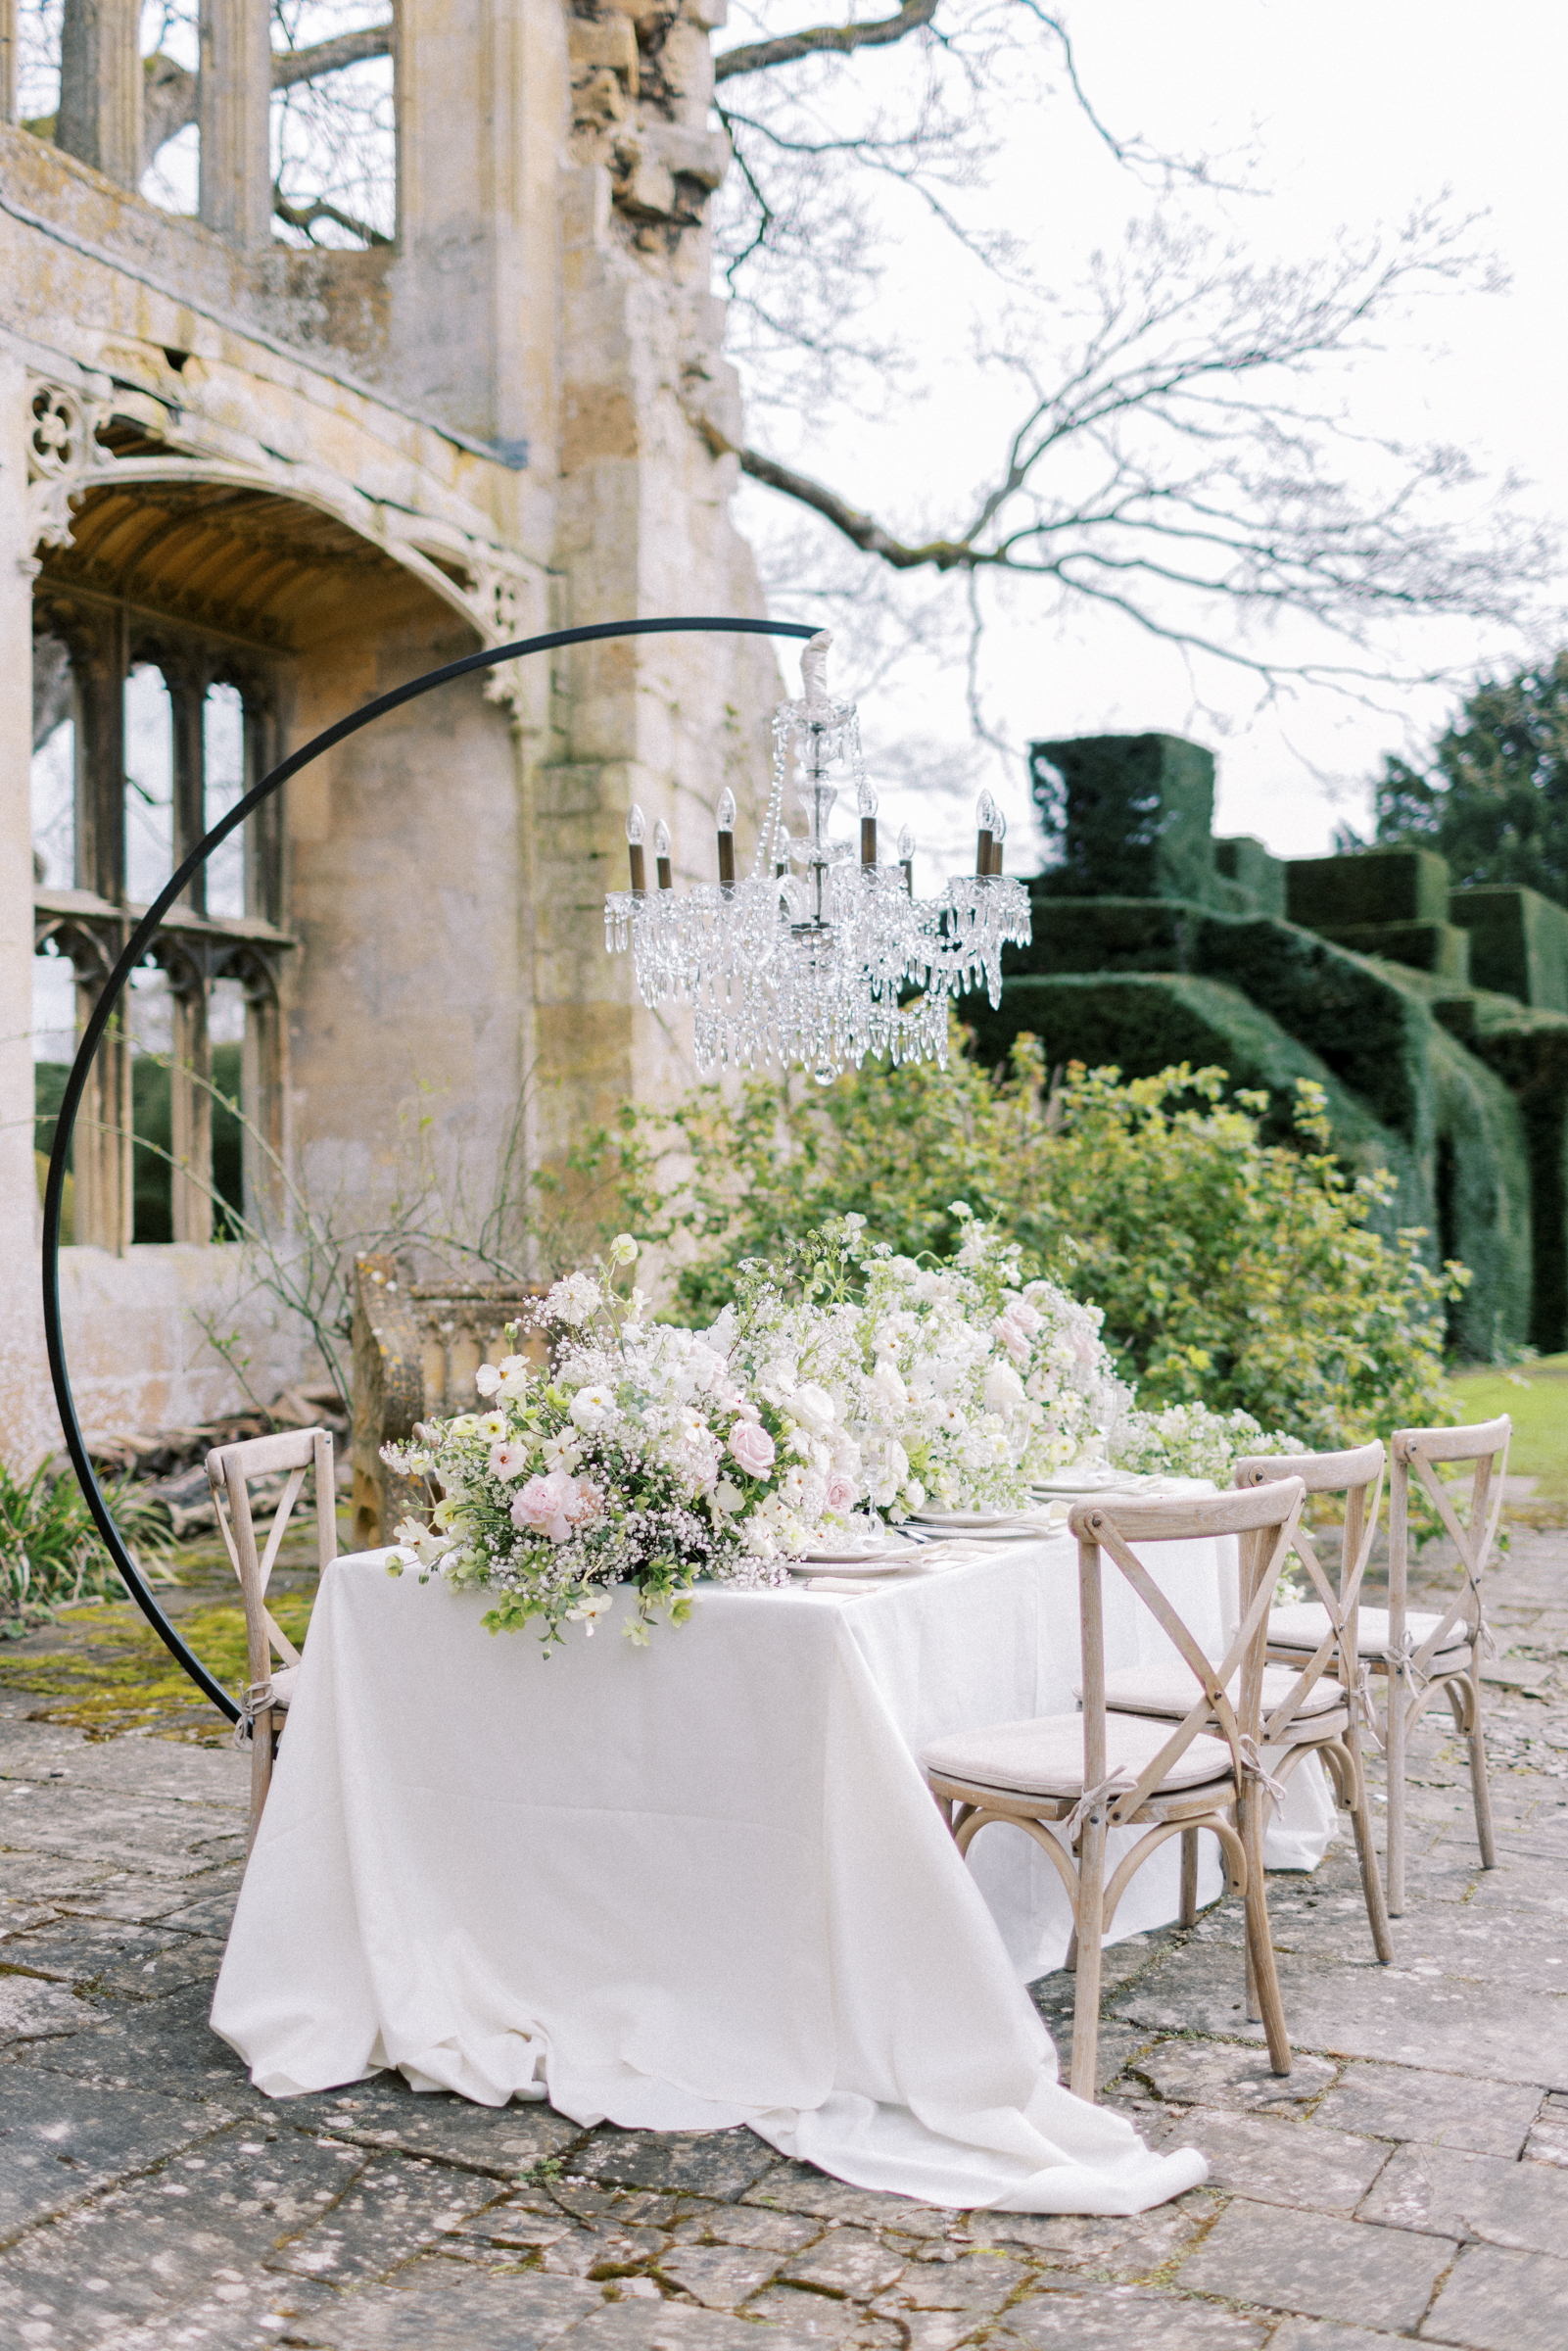 Dine under the stars and within the castle walls of Sudeley Castle Wedding venue in the Cotswolds.